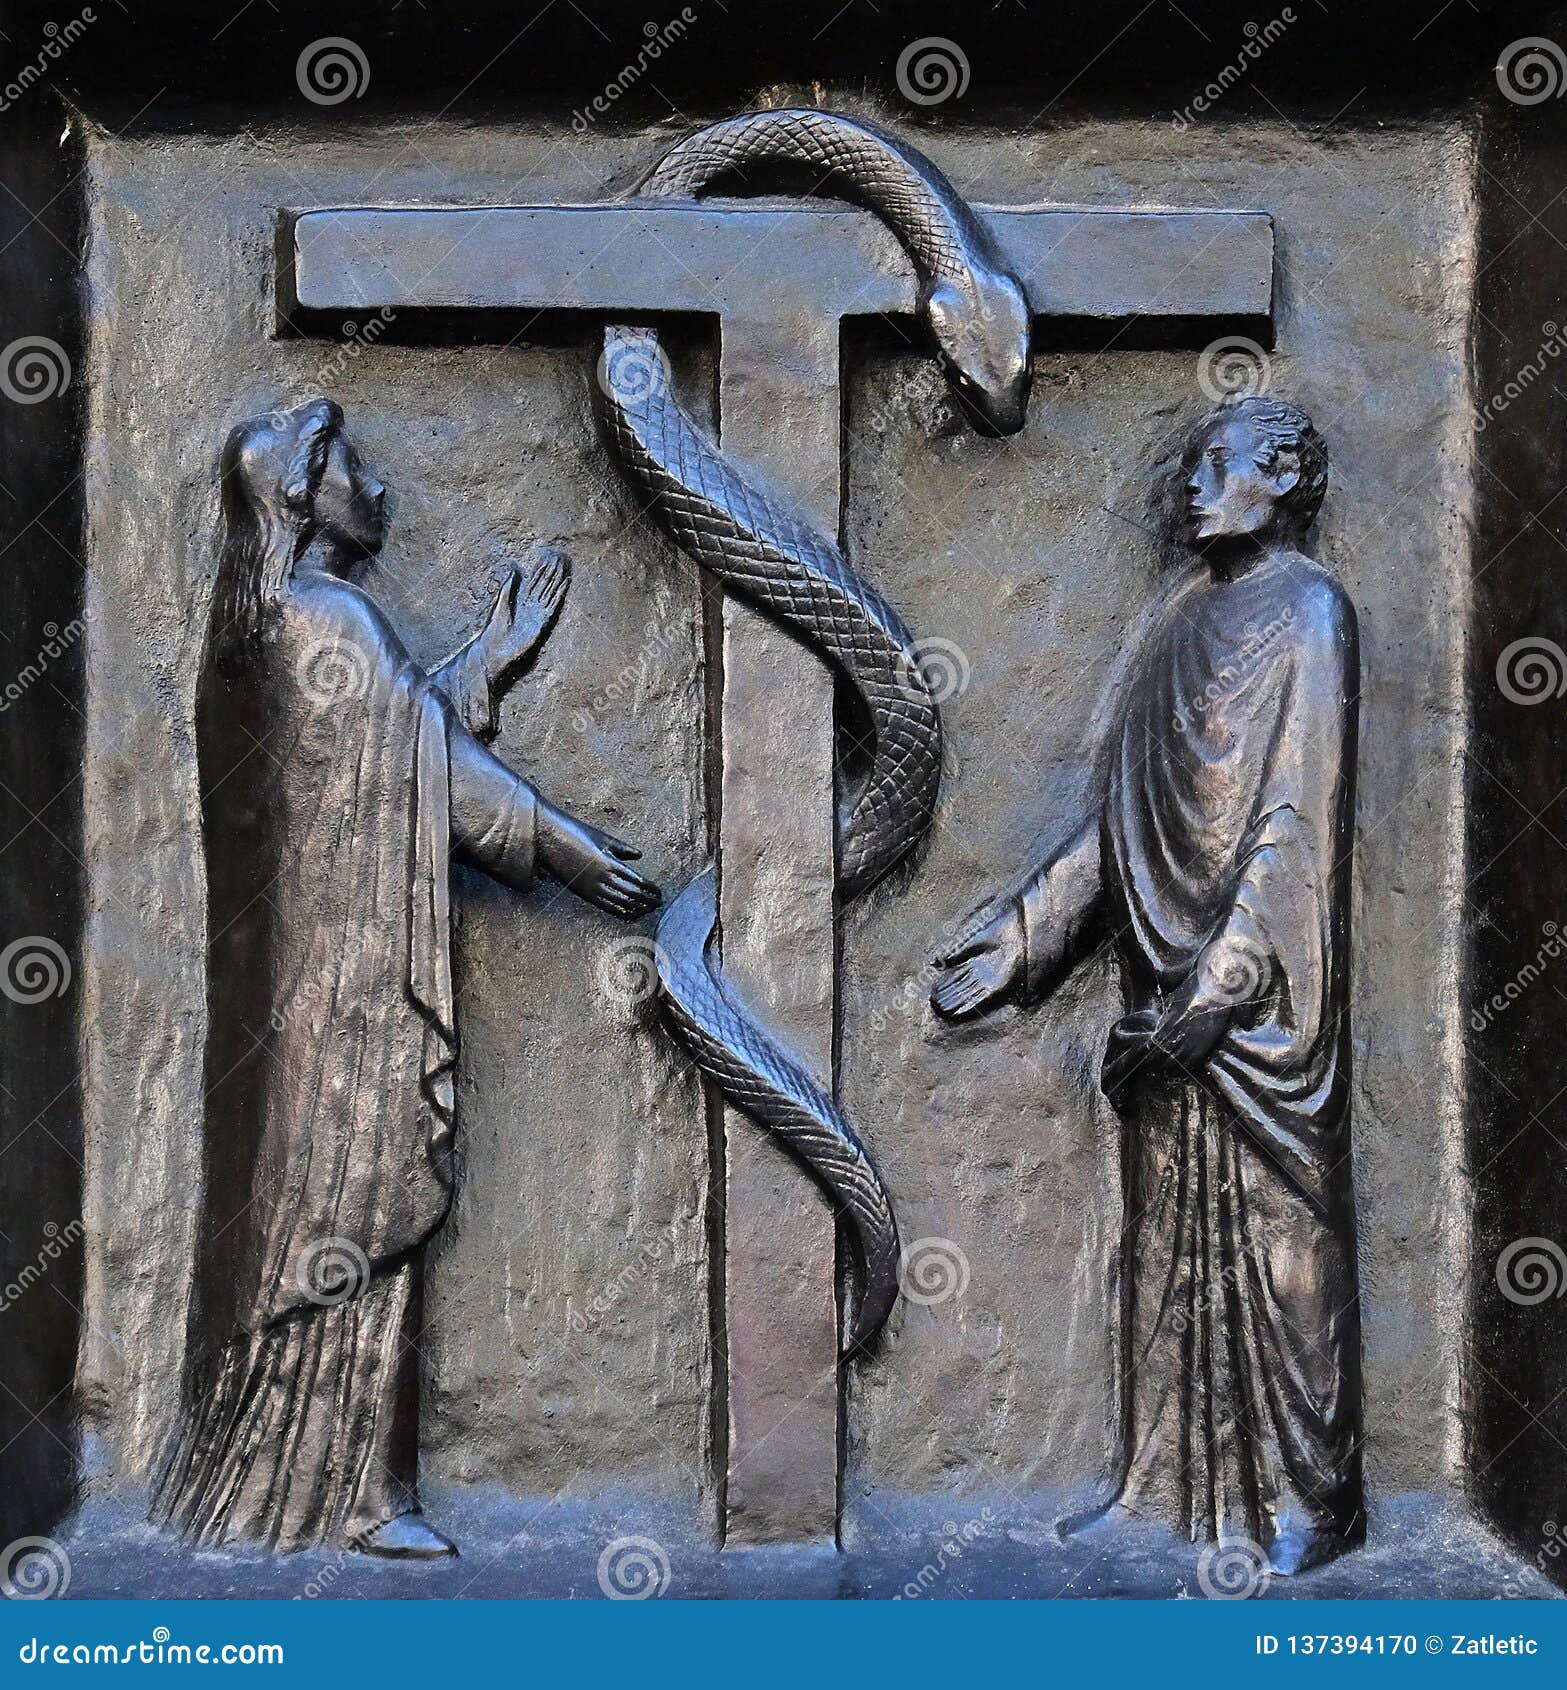 the redemptive death of christ depicted in the emblem of the bronze serpent, door of the grossmunster church in zurich